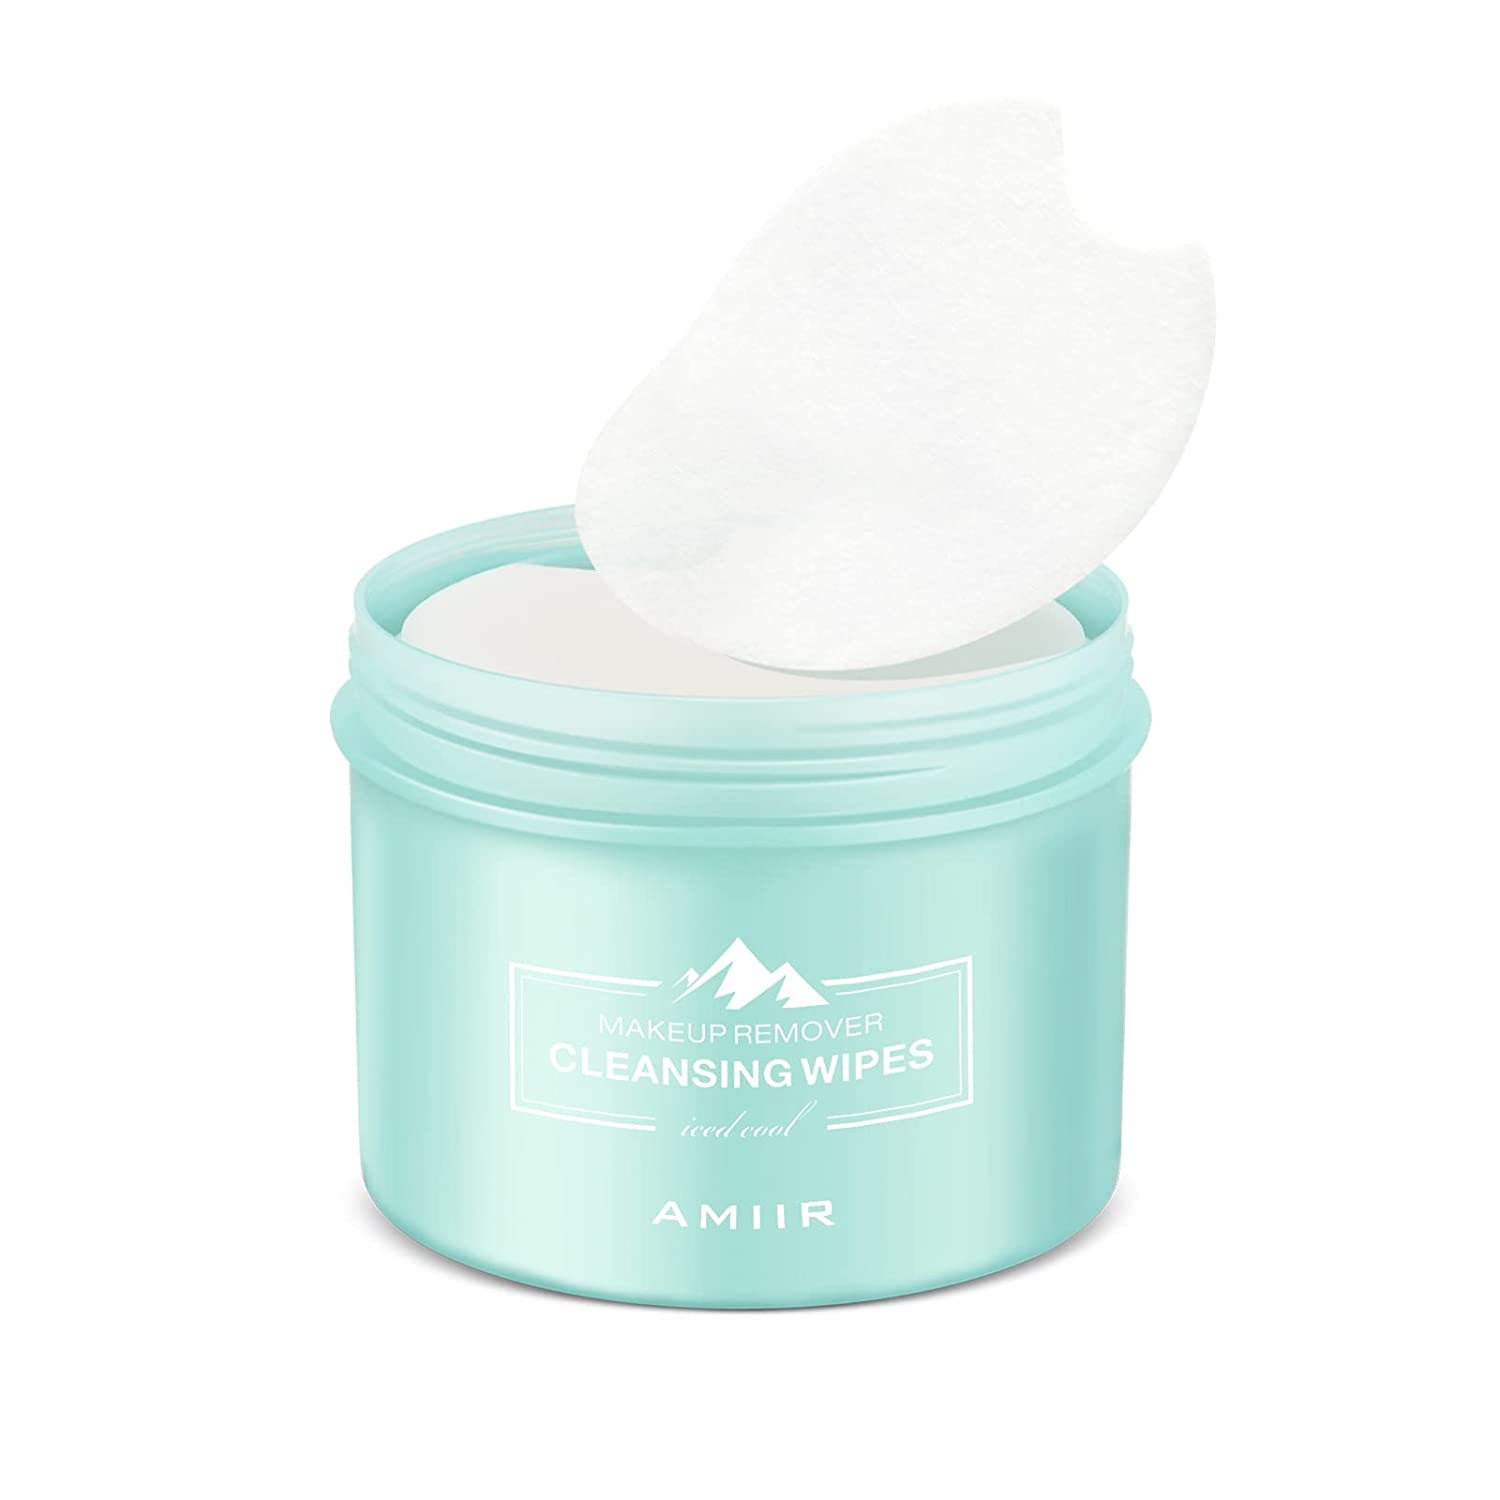 AMIIR Makeup Remover Cleansing Wipes